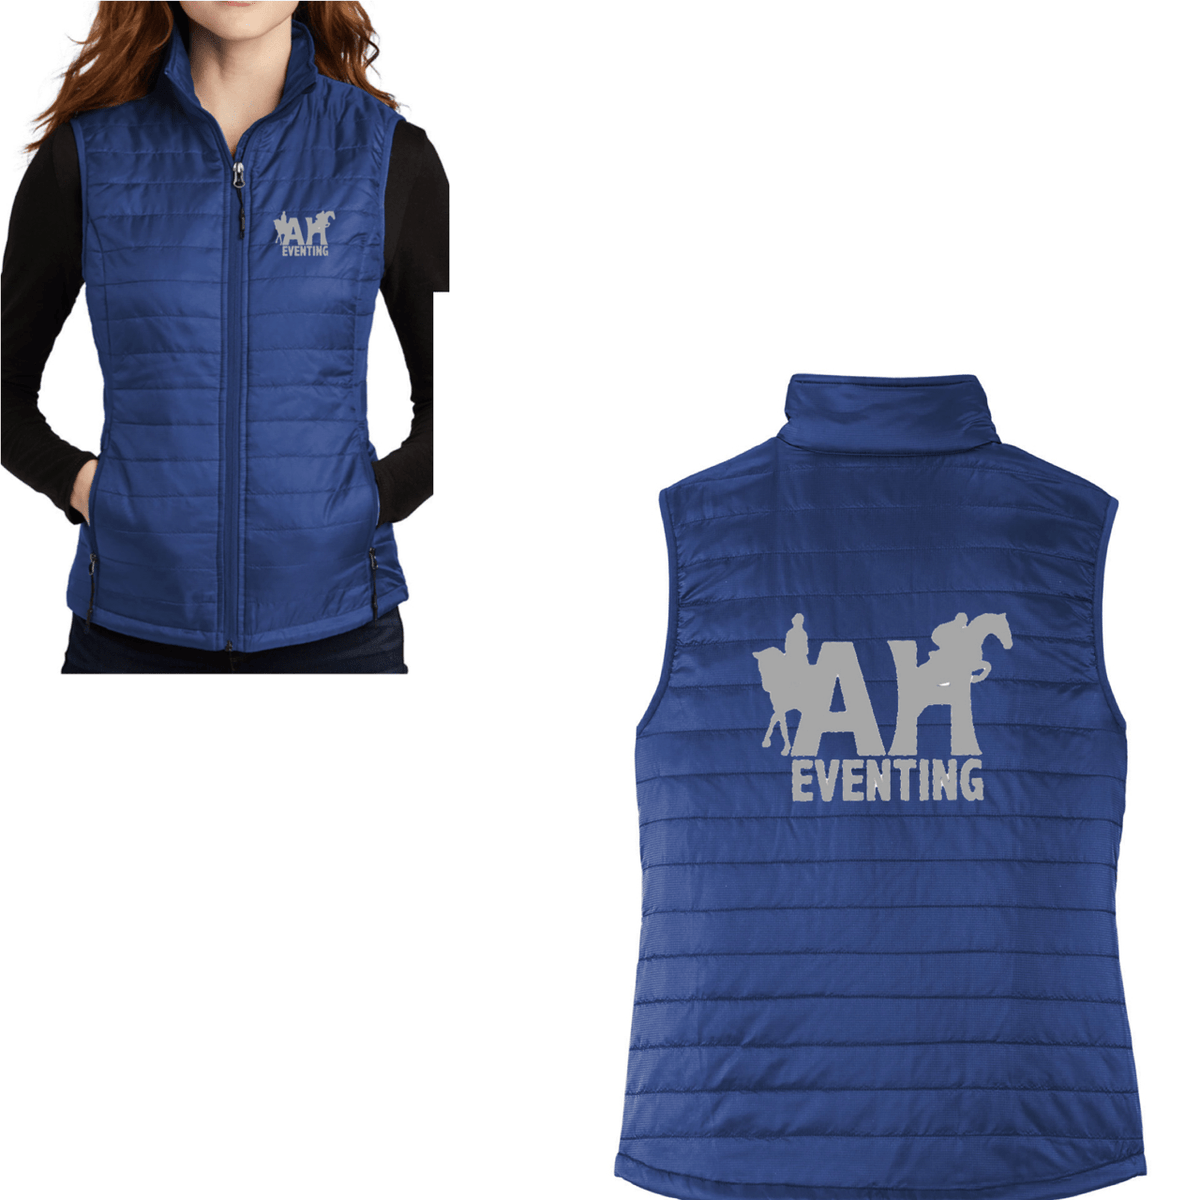 Equestrian Team Apparel Custom Jacket AH Eventing Puffy Vest equestrian team apparel online tack store mobile tack store custom farm apparel custom show stable clothing equestrian lifestyle horse show clothing riding clothes horses equestrian tack store